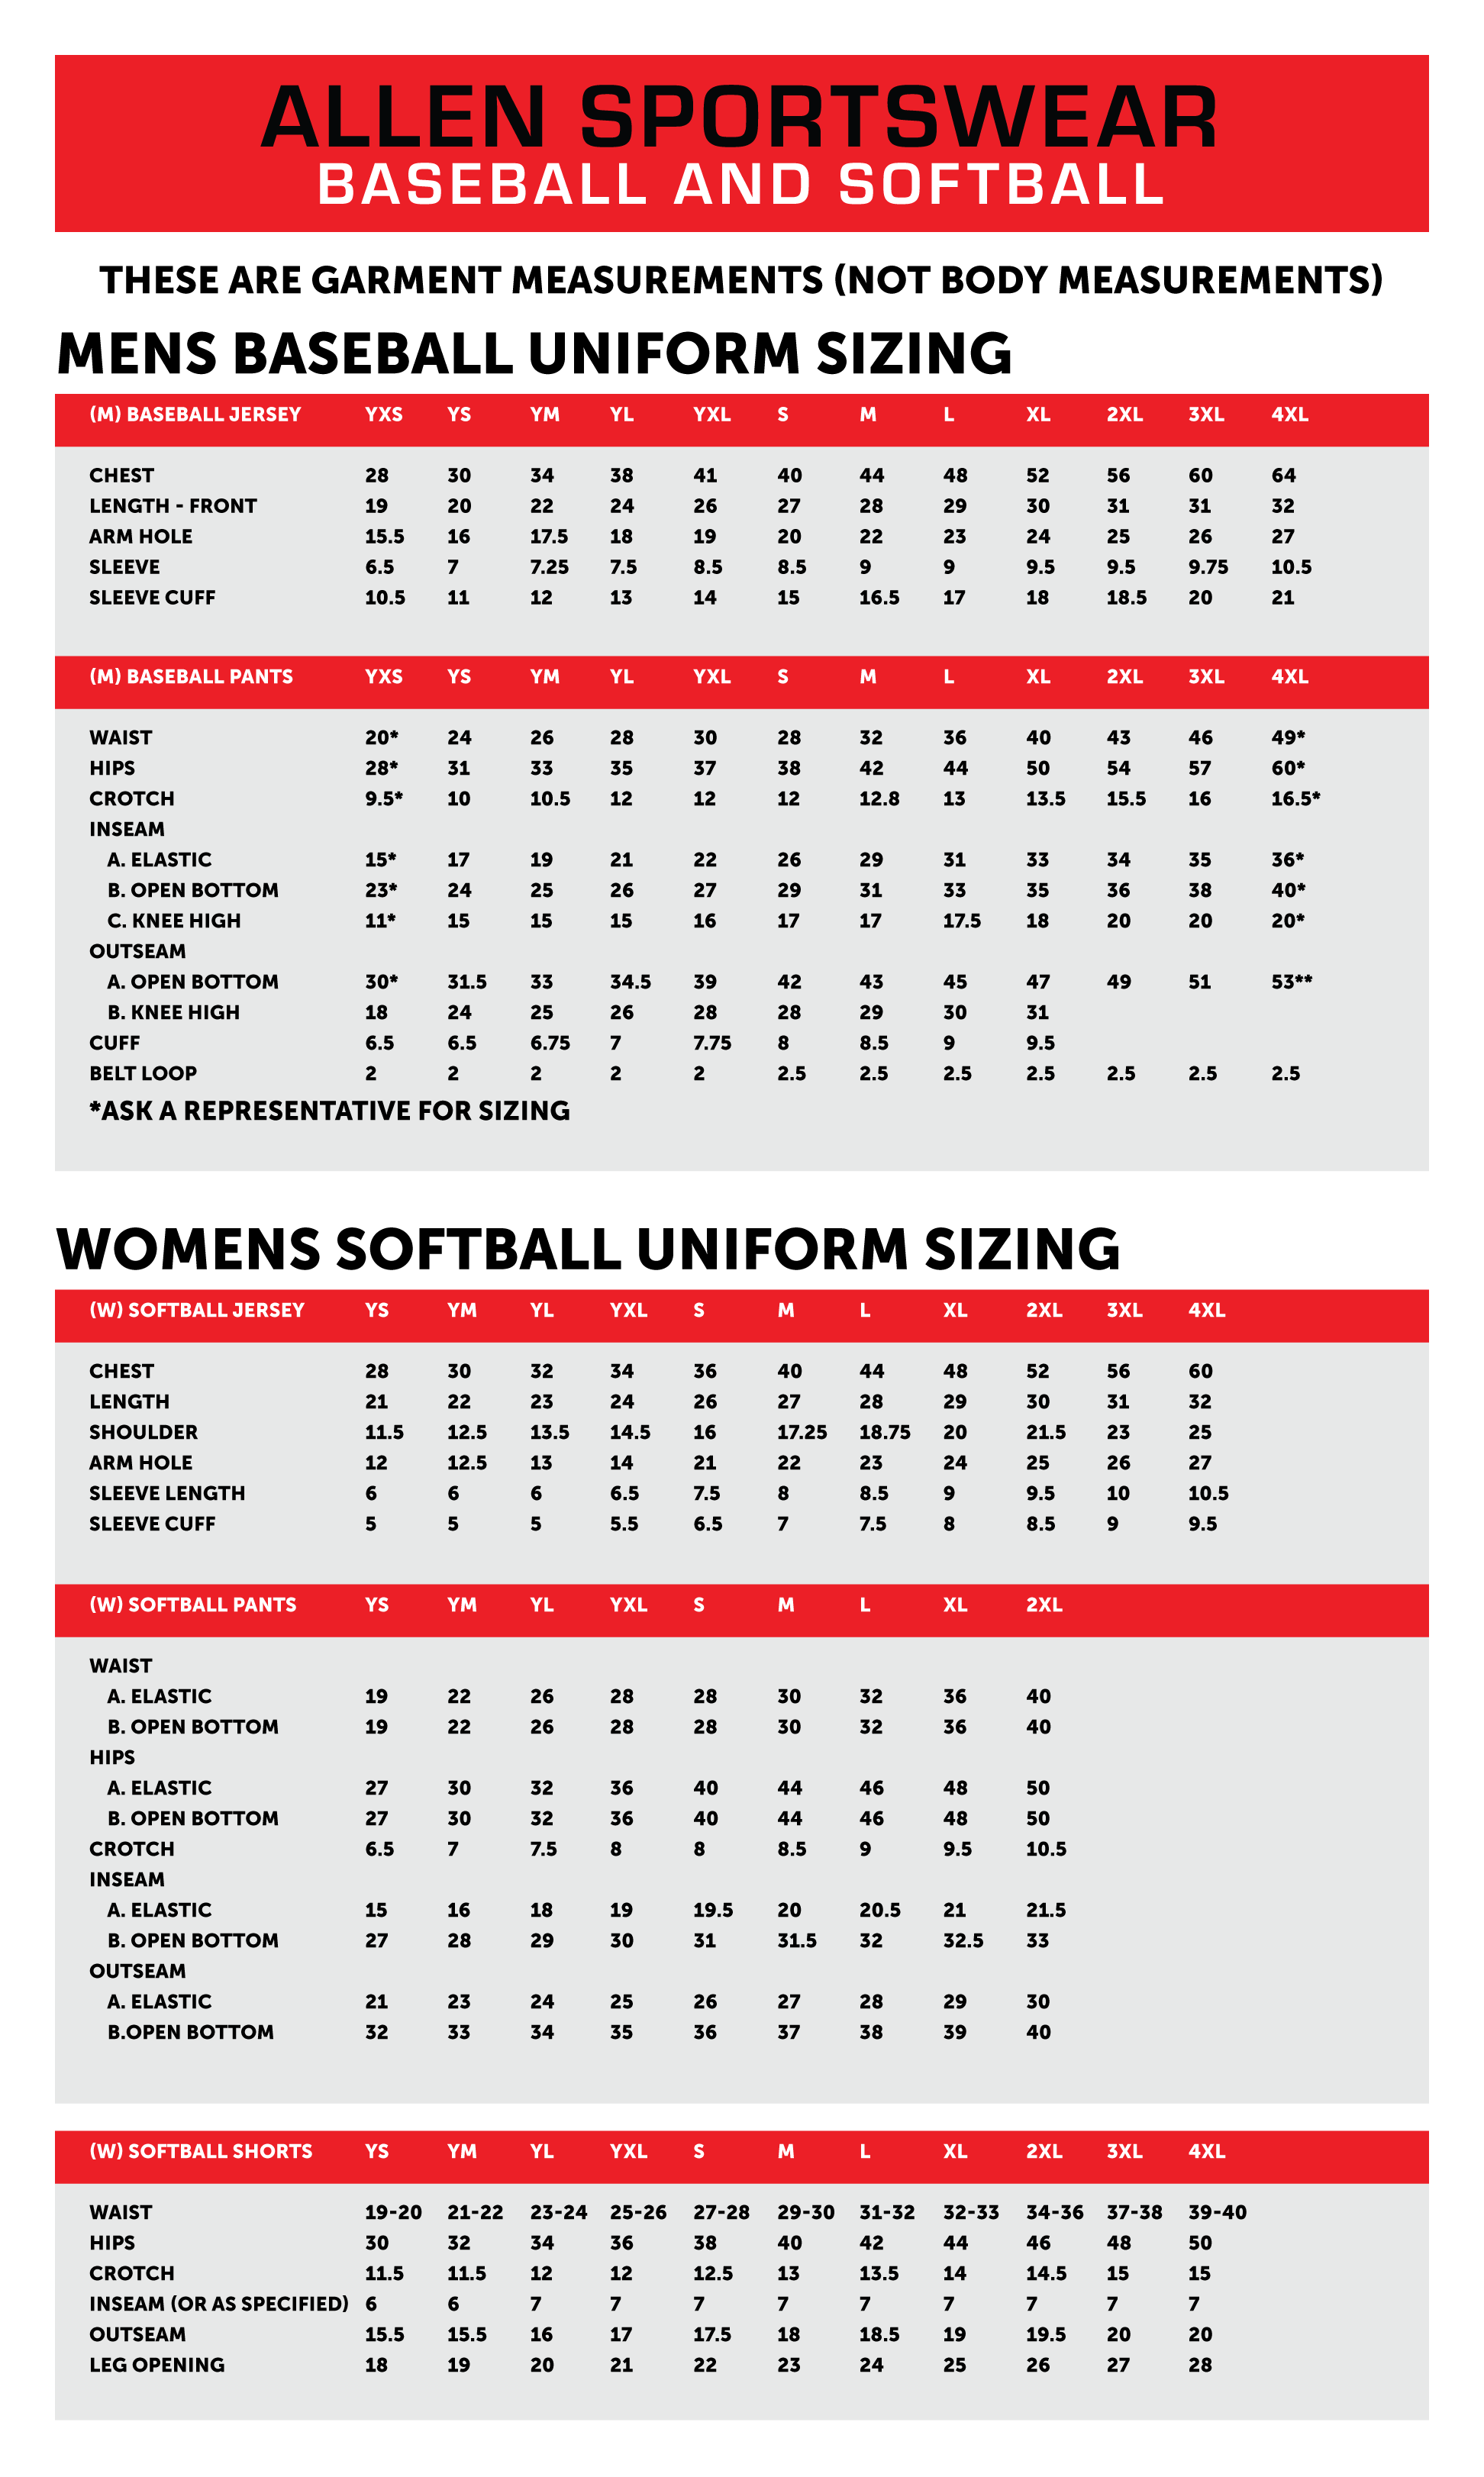 Size Chart For Youth Baseball Pants